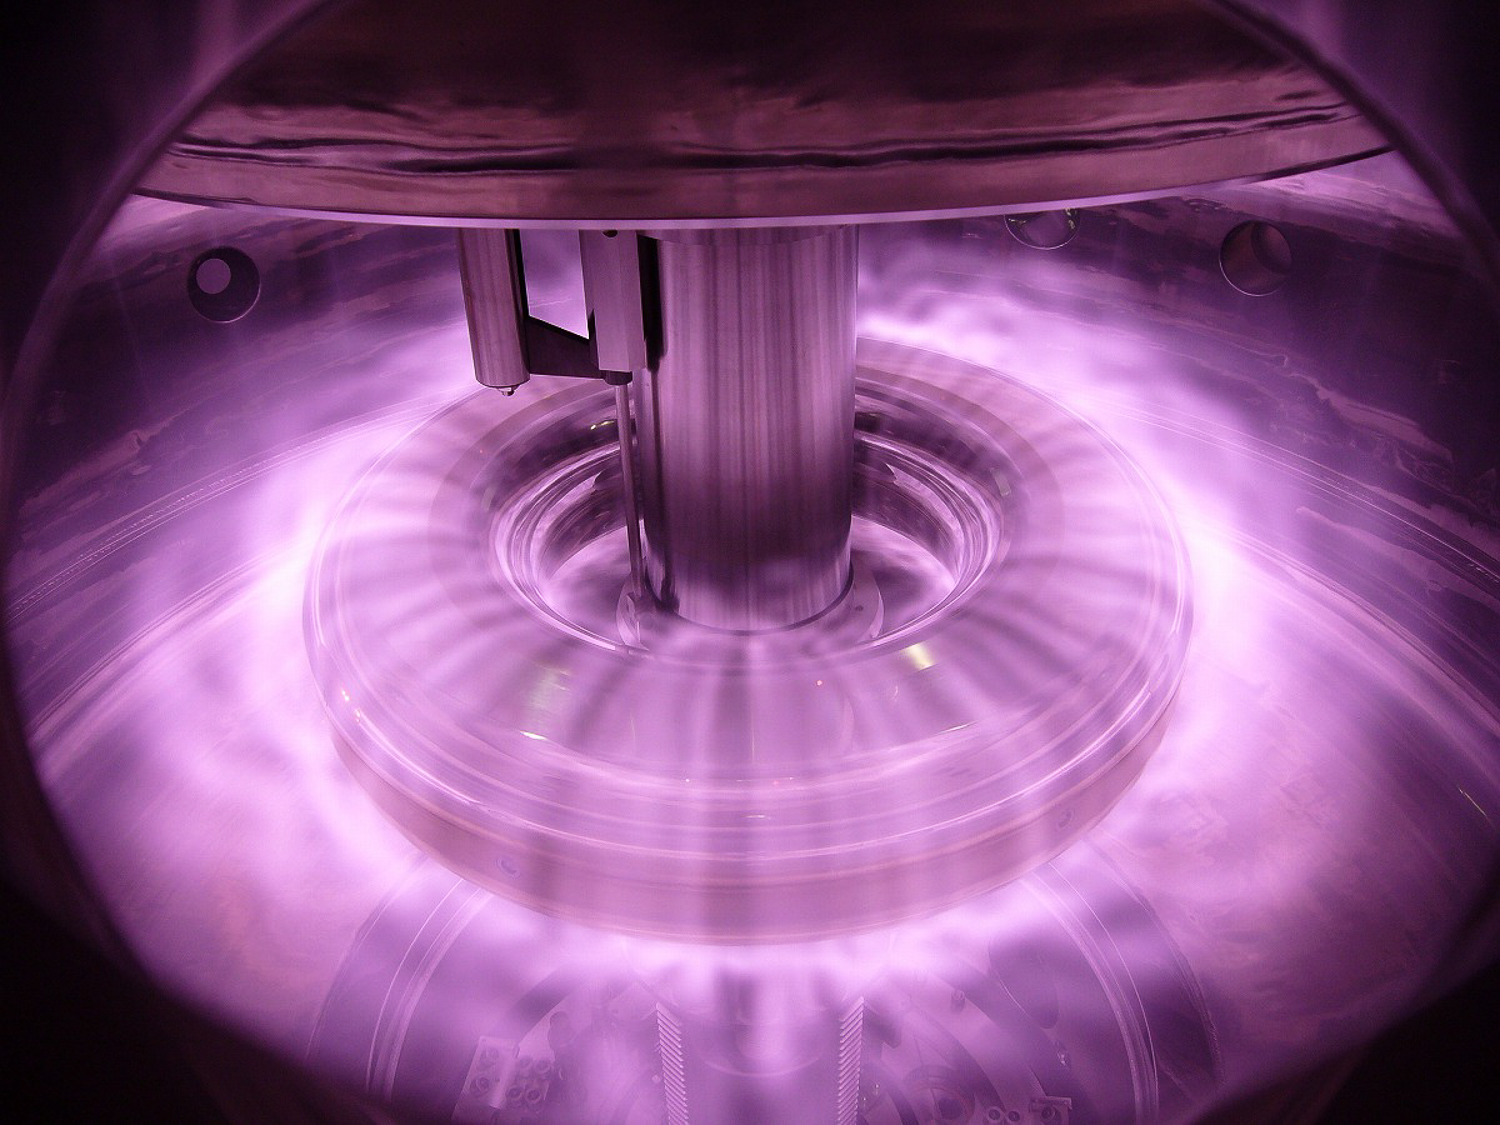 Collections of charged particles (plasmas) can be confined by levitated dipole magnets